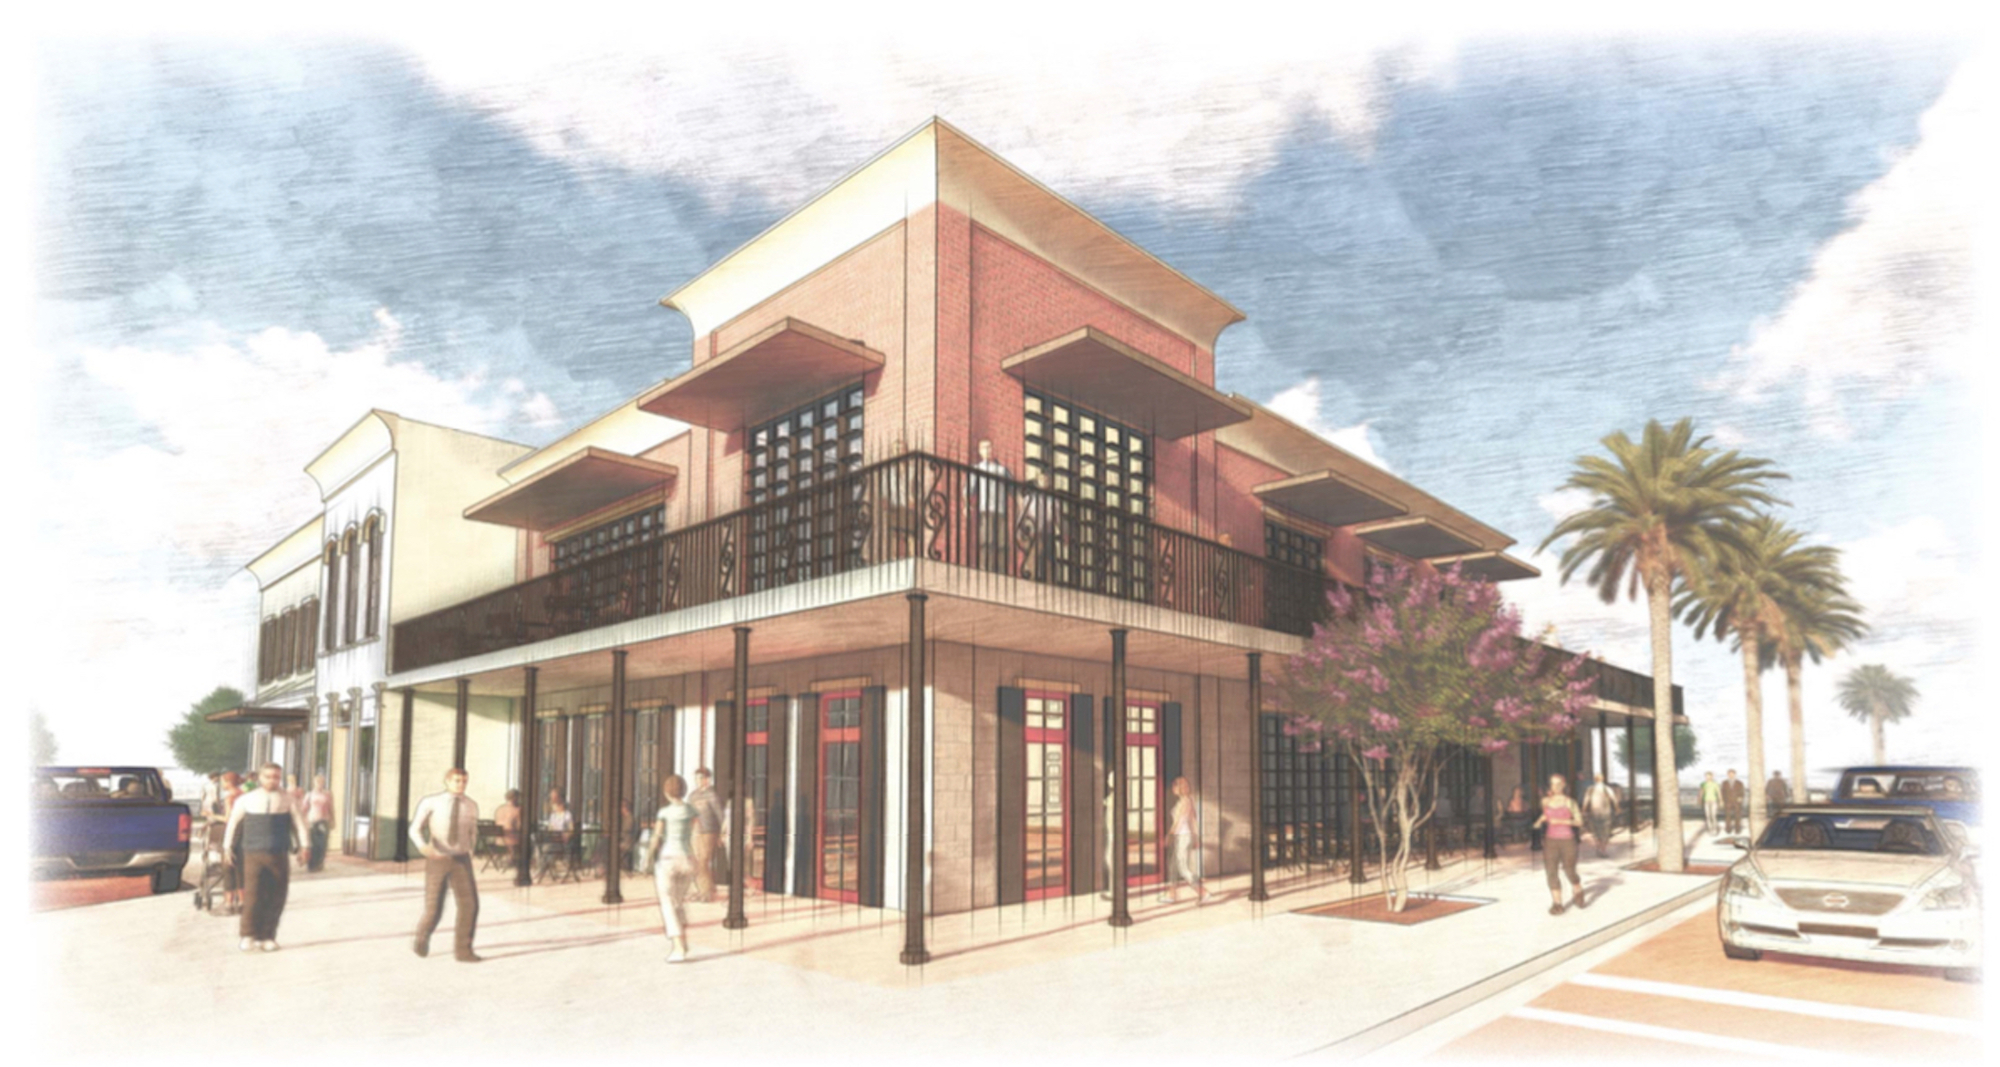 This rendering represents the vision for a mixed-use building at the parcel located at 2 N. Bluford Ave, situated across the street from the site slated for the new Ocoee City Hall.